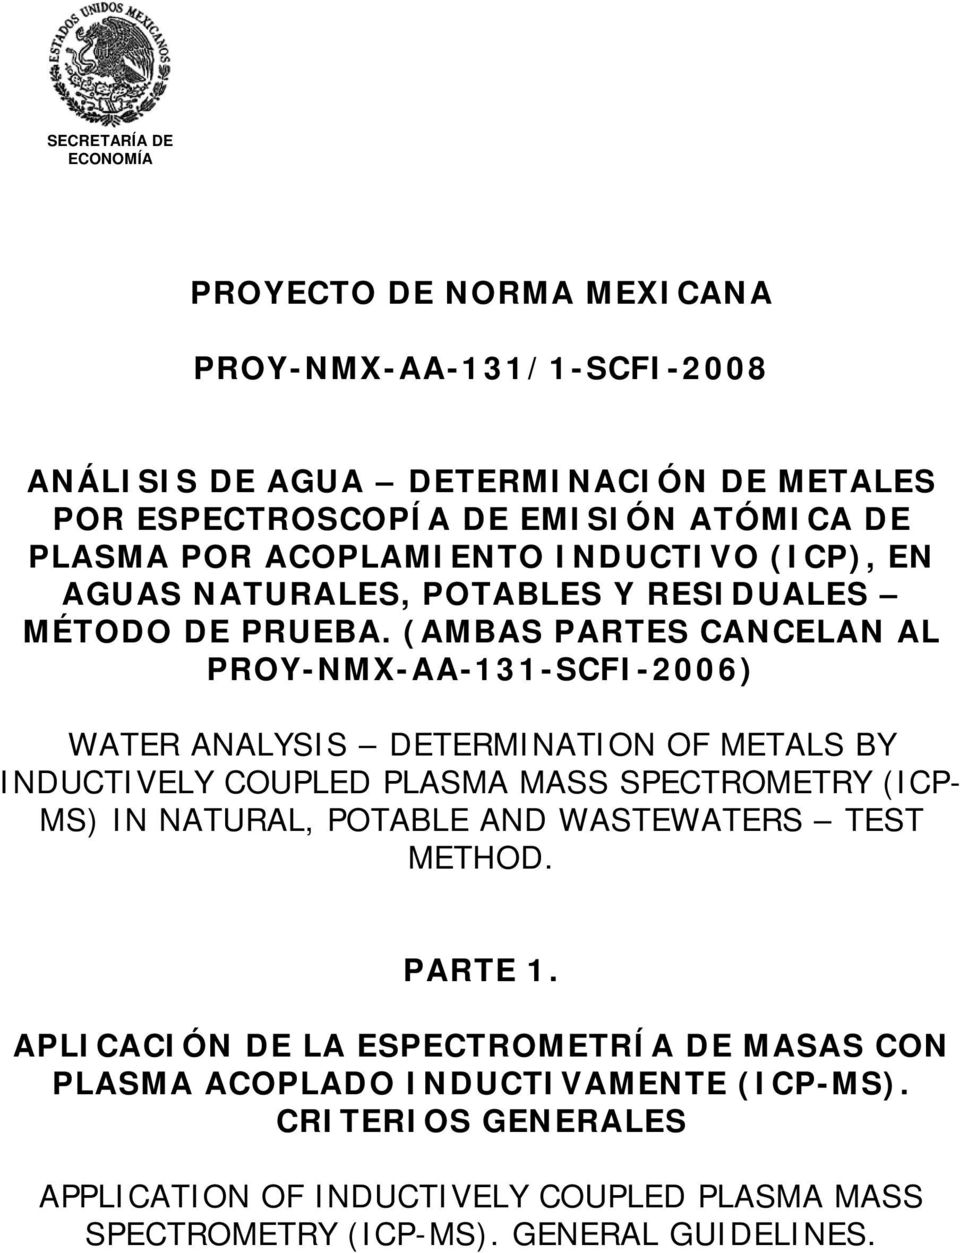 (AMBAS PARTES CANCELAN AL PROY-NMX-AA-131-SCFI-2006) WATER ANALYSIS DETERMINATION OF METALS BY INDUCTIVELY COUPLED PLASMA MASS SPECTROMETRY (ICP- MS) IN